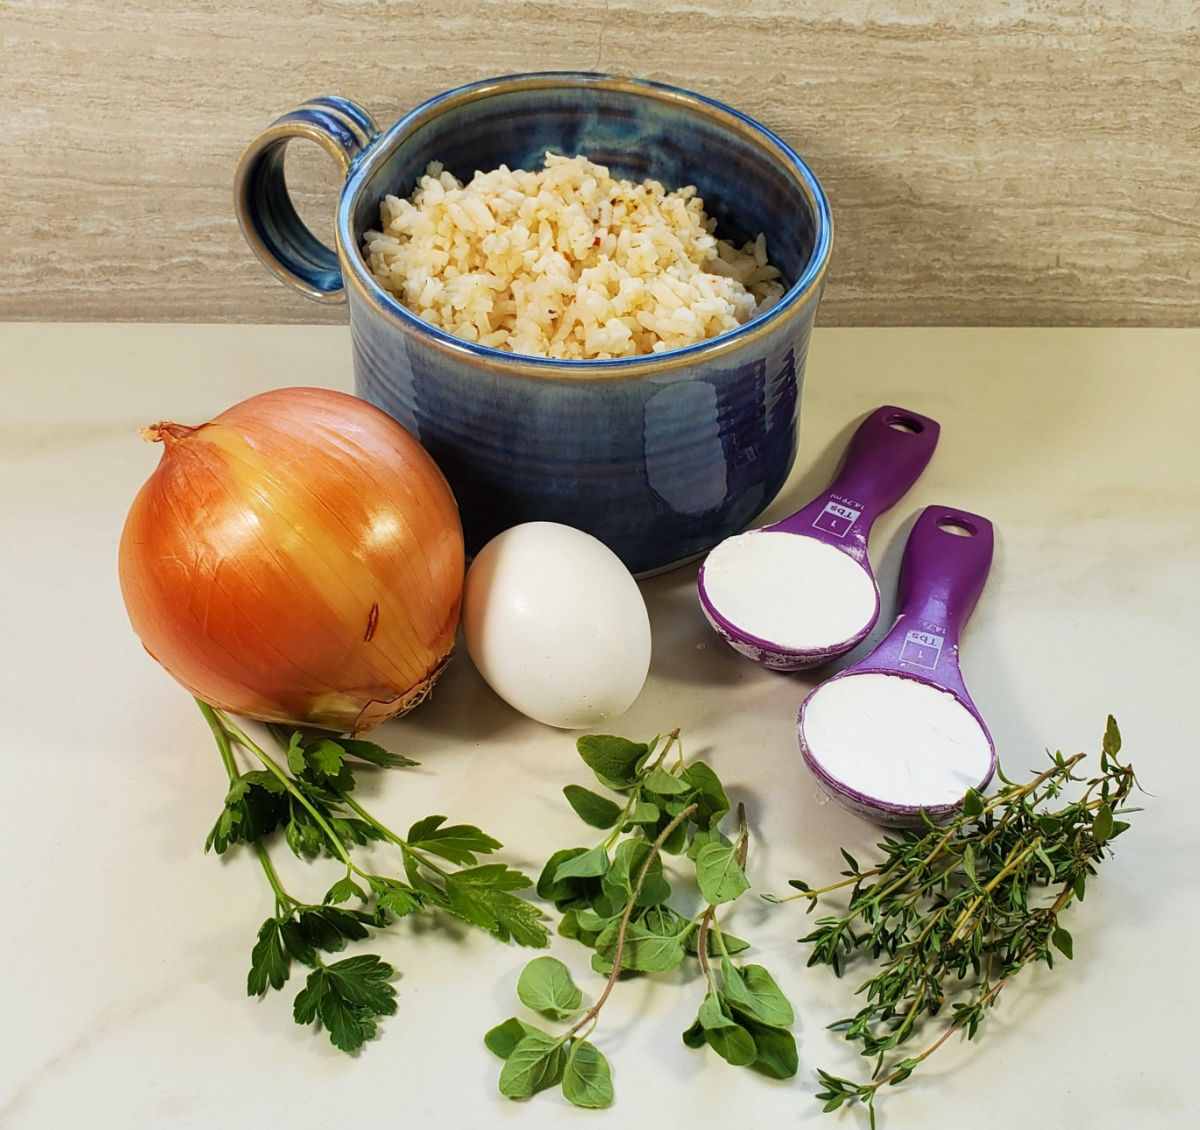 Ingredients for leftover rice patties, - onion, herbs and egg with cornstarch and rice.